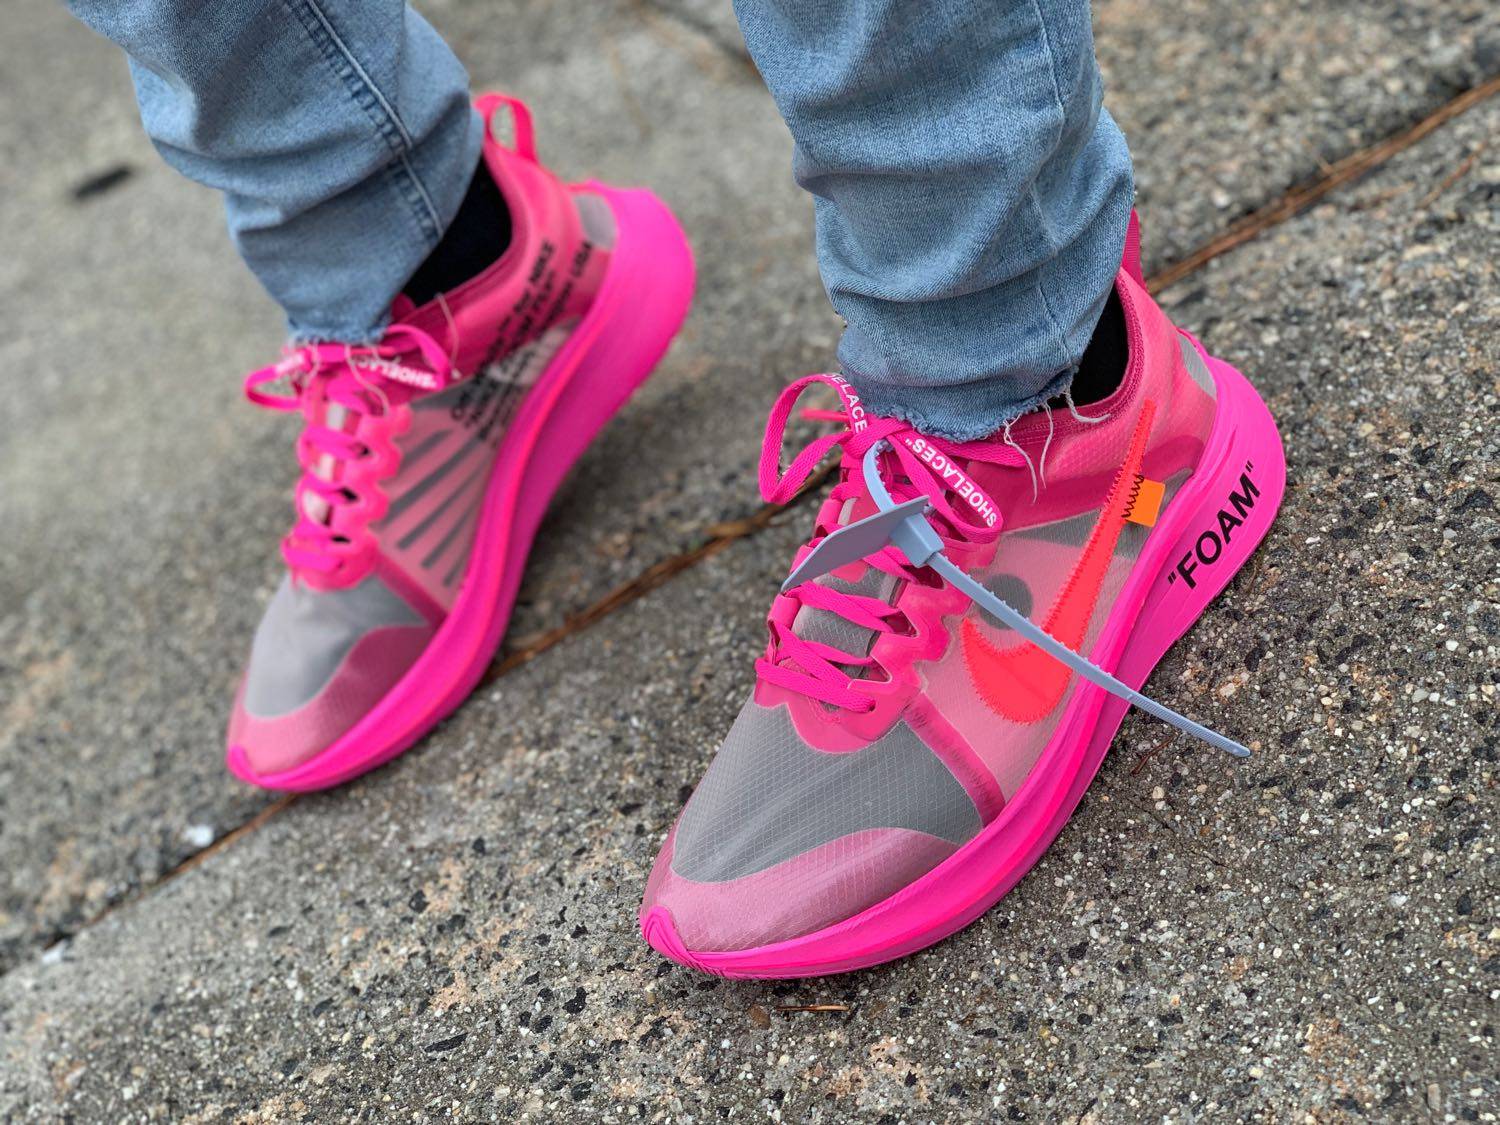 Off-White x Zoom Fly SP 'Tulip Pink' - Nike - AJ4588 600 | GOAT